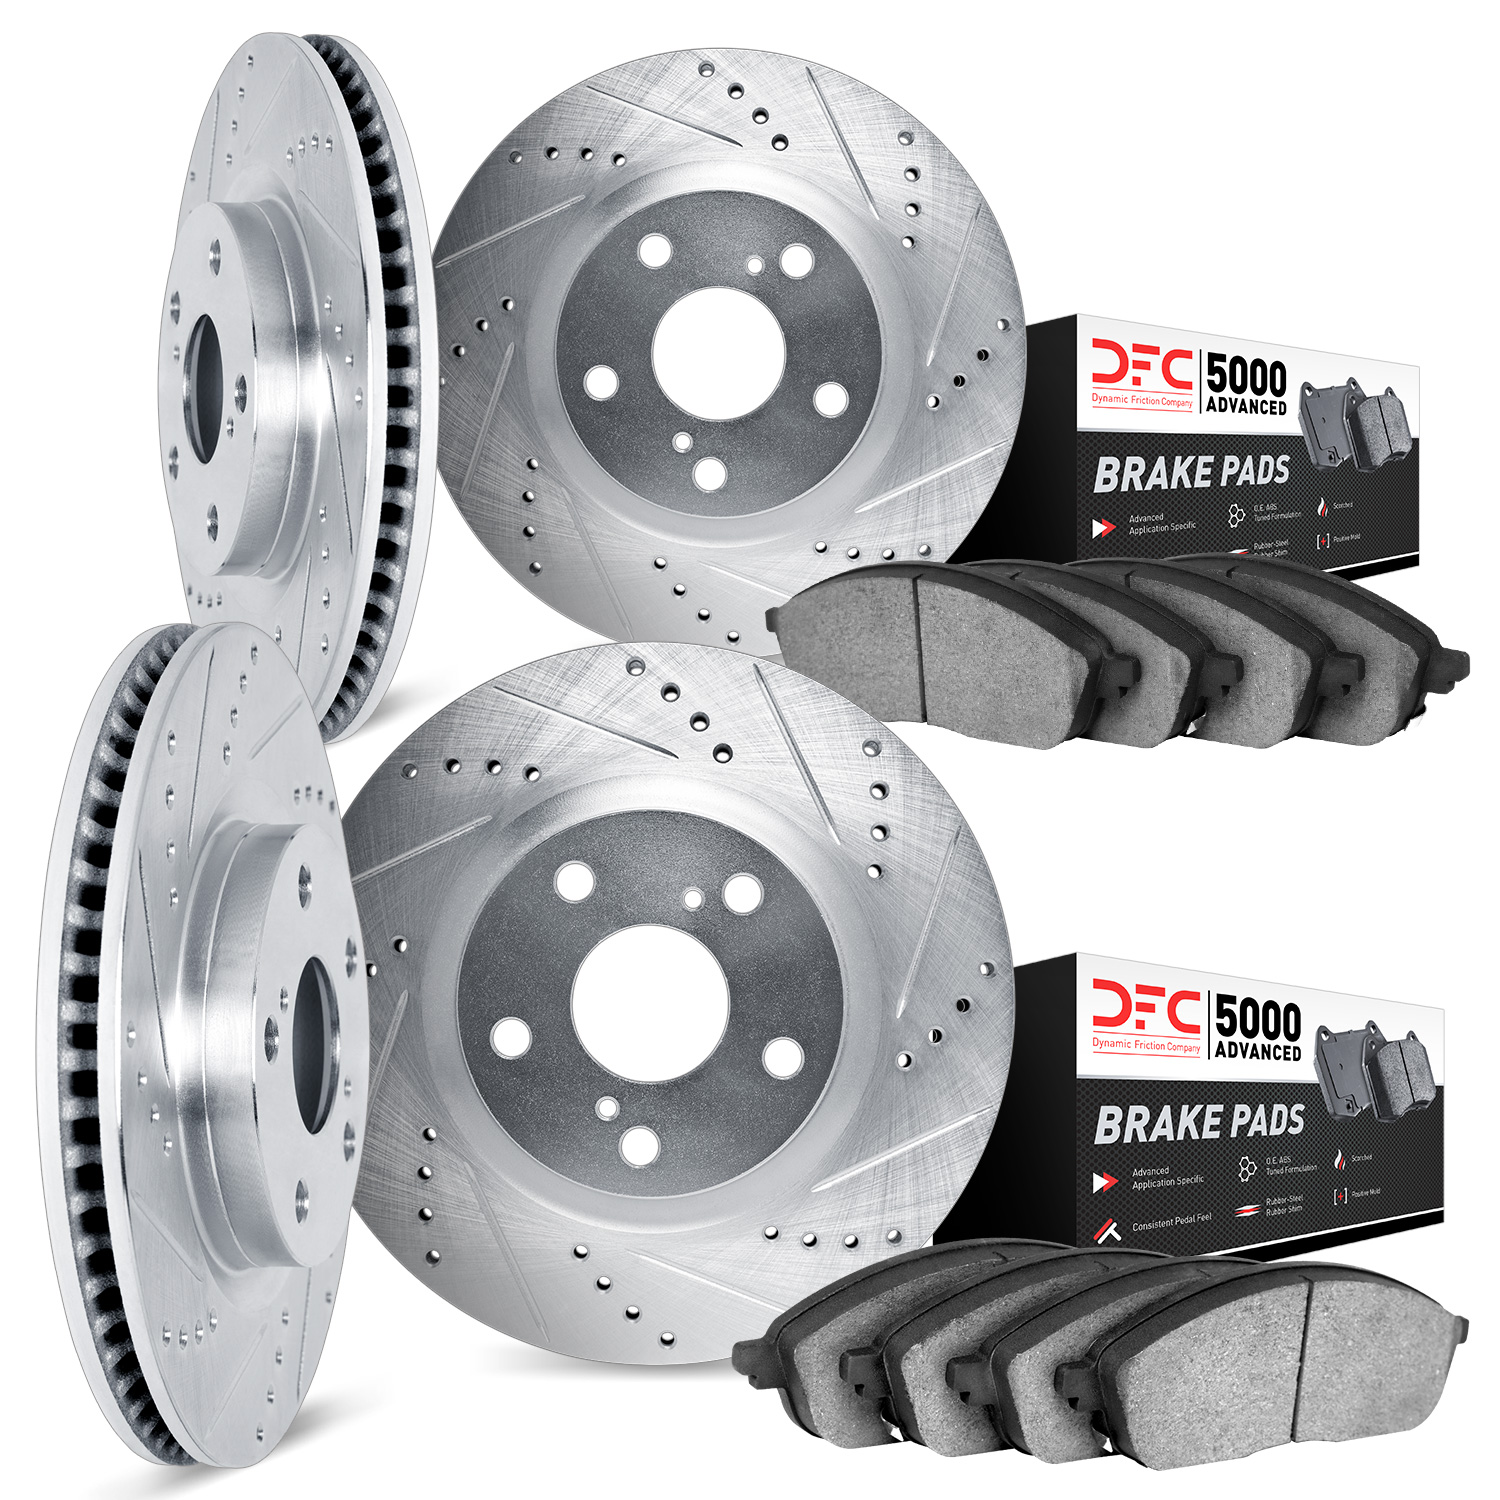 7504-75009 Drilled/Slotted Brake Rotors w/5000 Advanced Brake Pads Kit [Silver], Fits Select Lexus/Toyota/Scion, Position: Front